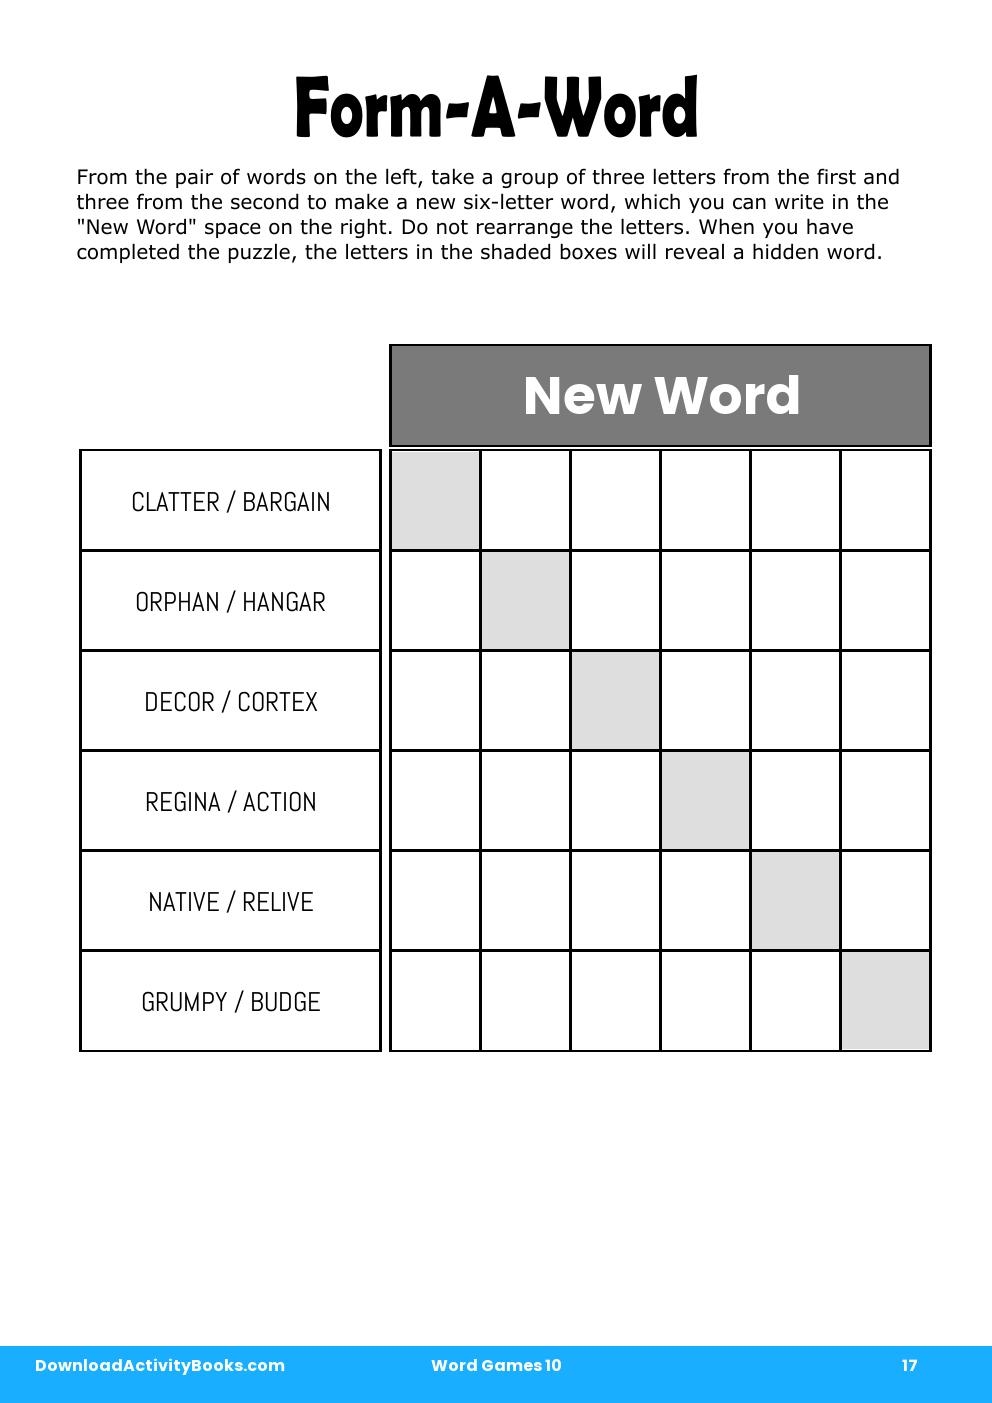 Form-A-Word in Word Games 10